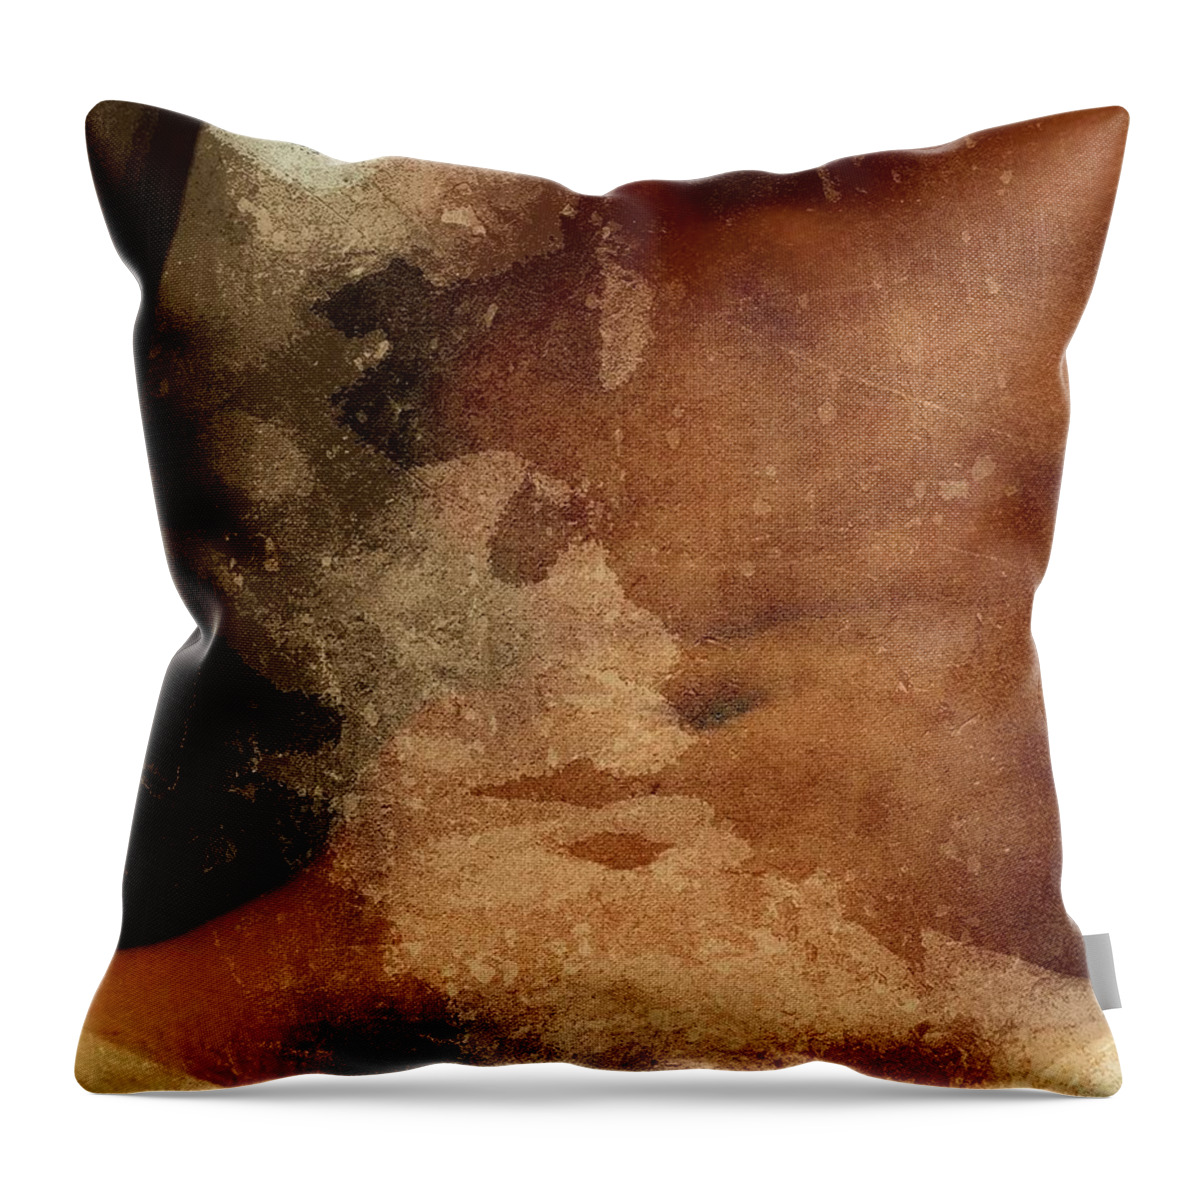 Male Throw Pillow featuring the digital art Perfectly Still by Tg Devore